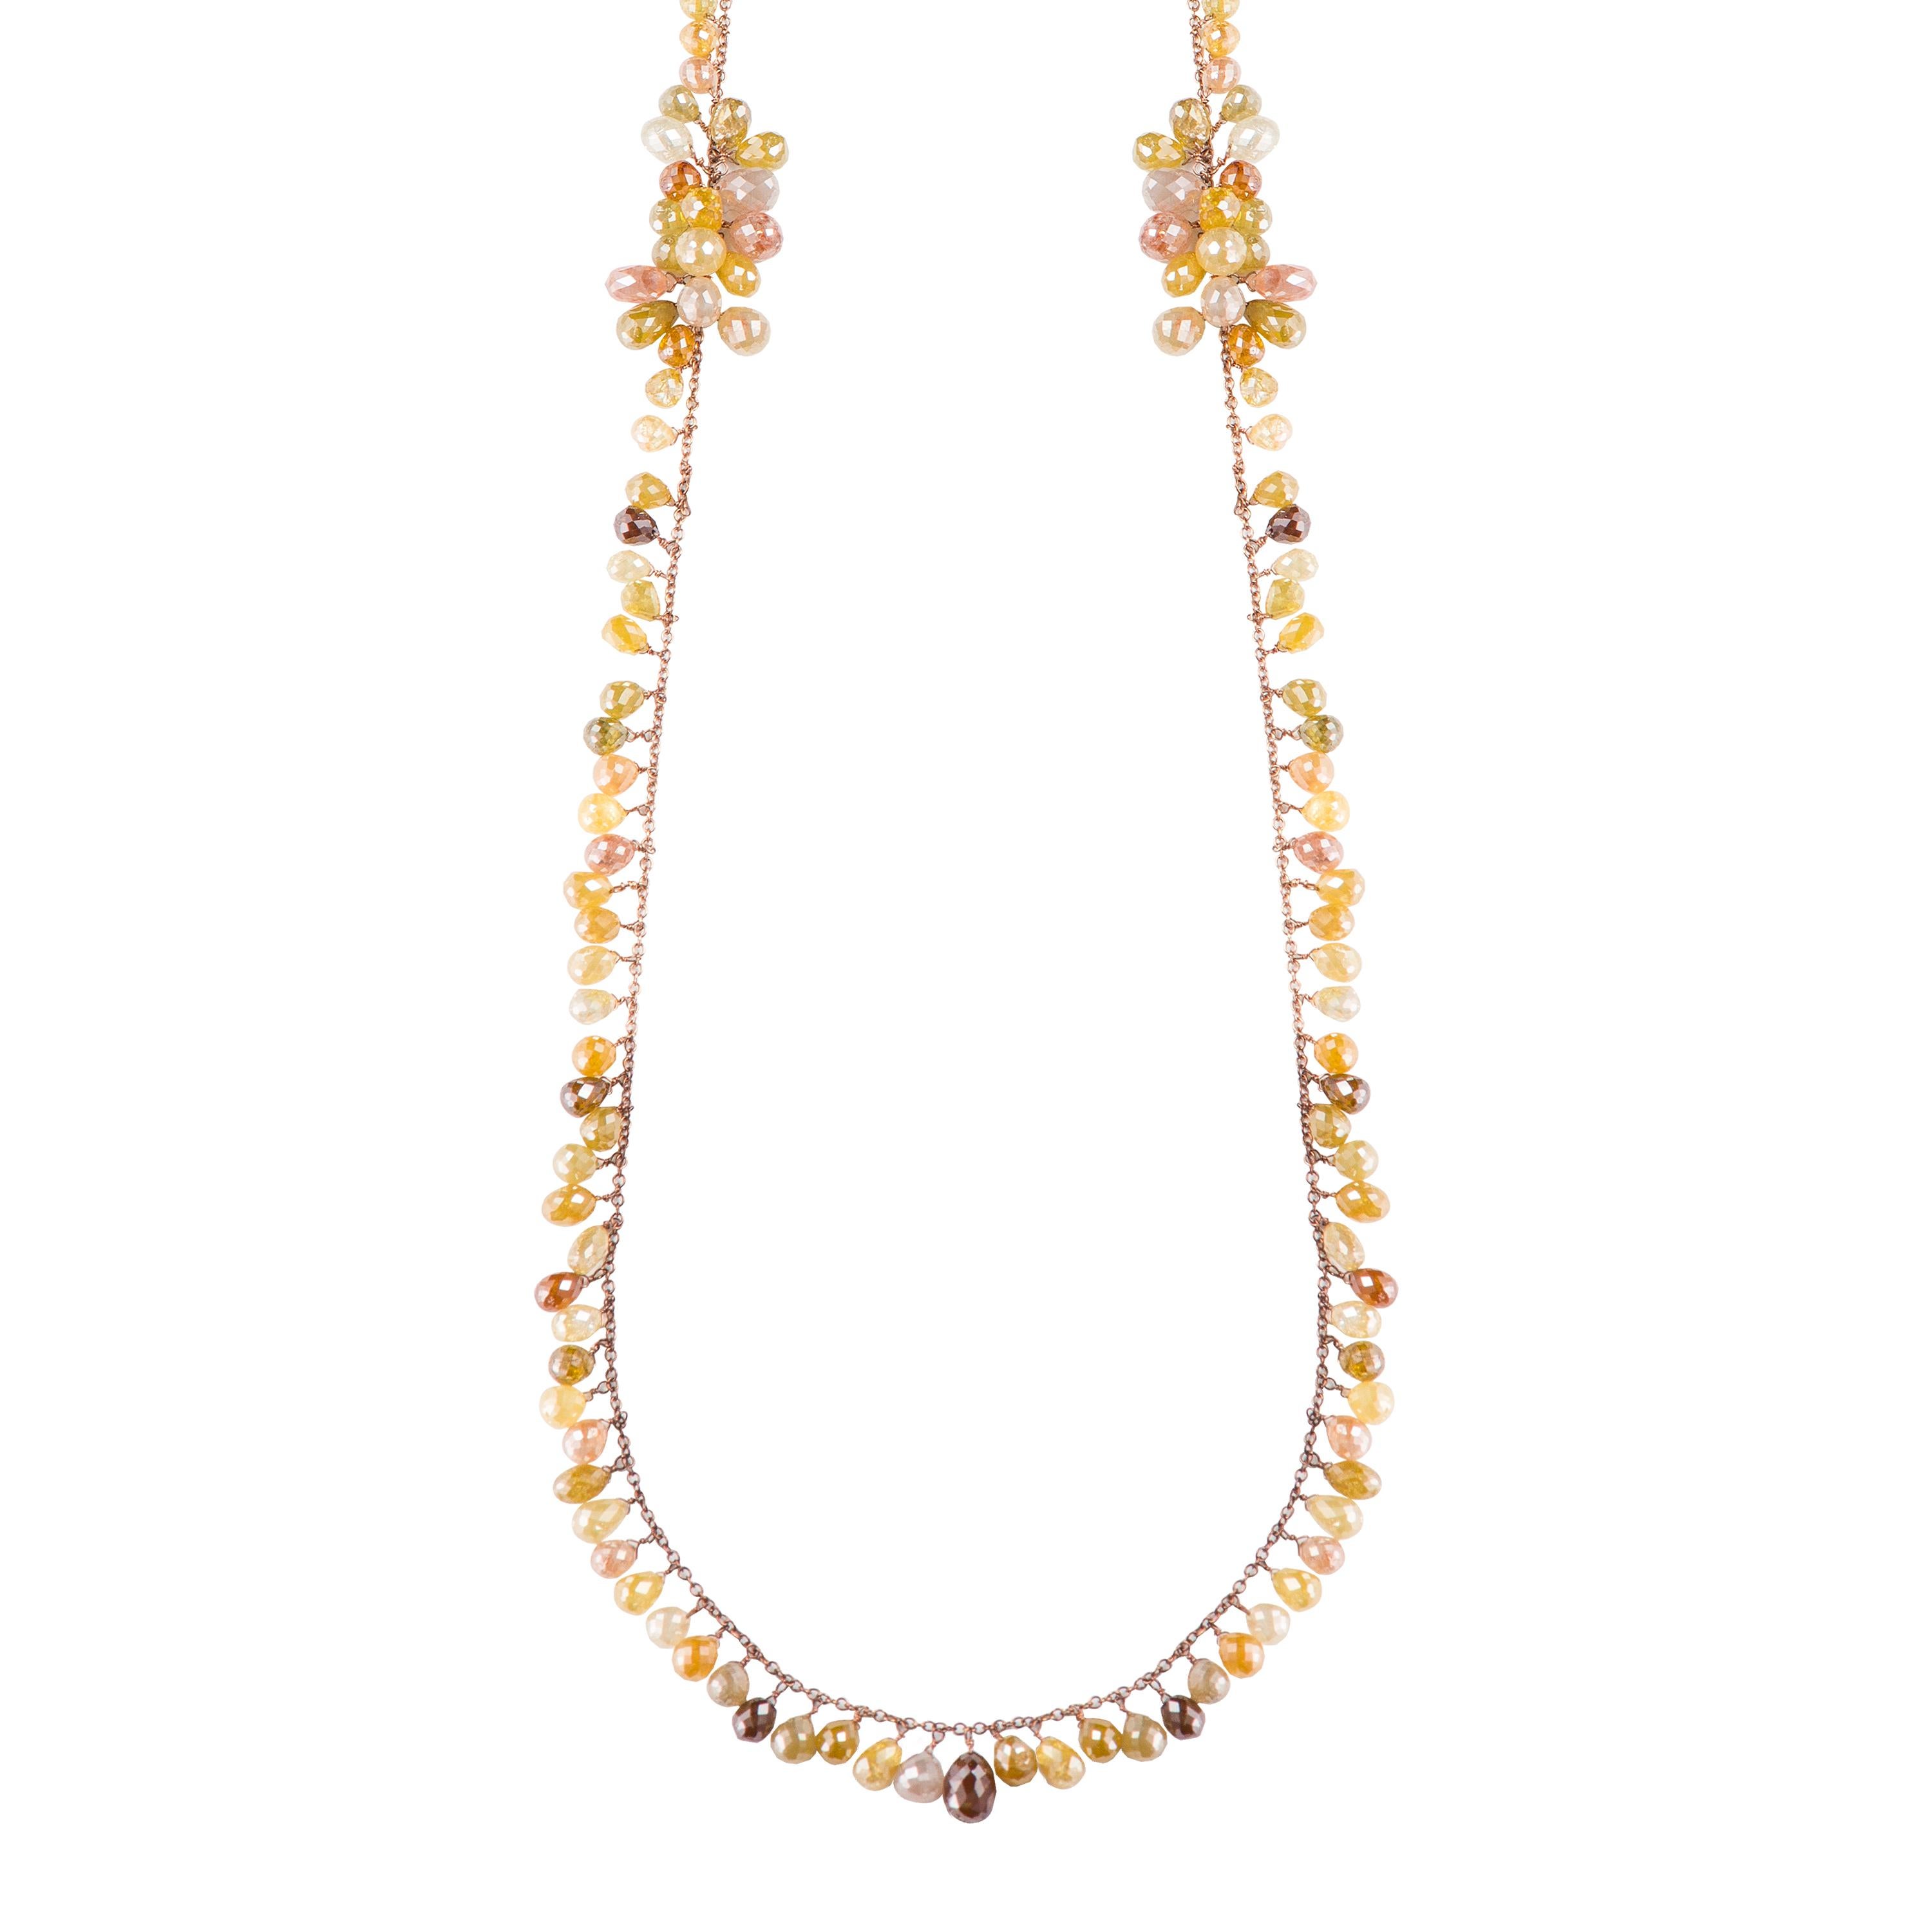 This one-of-a-kind 18k rose goldchain necklace features multicolor briolette cut diamond beads. Diamond beads dangle from the chain. In the mid section there are clusters of diamonds. A total weight of 140 carats were used in making this chain. The